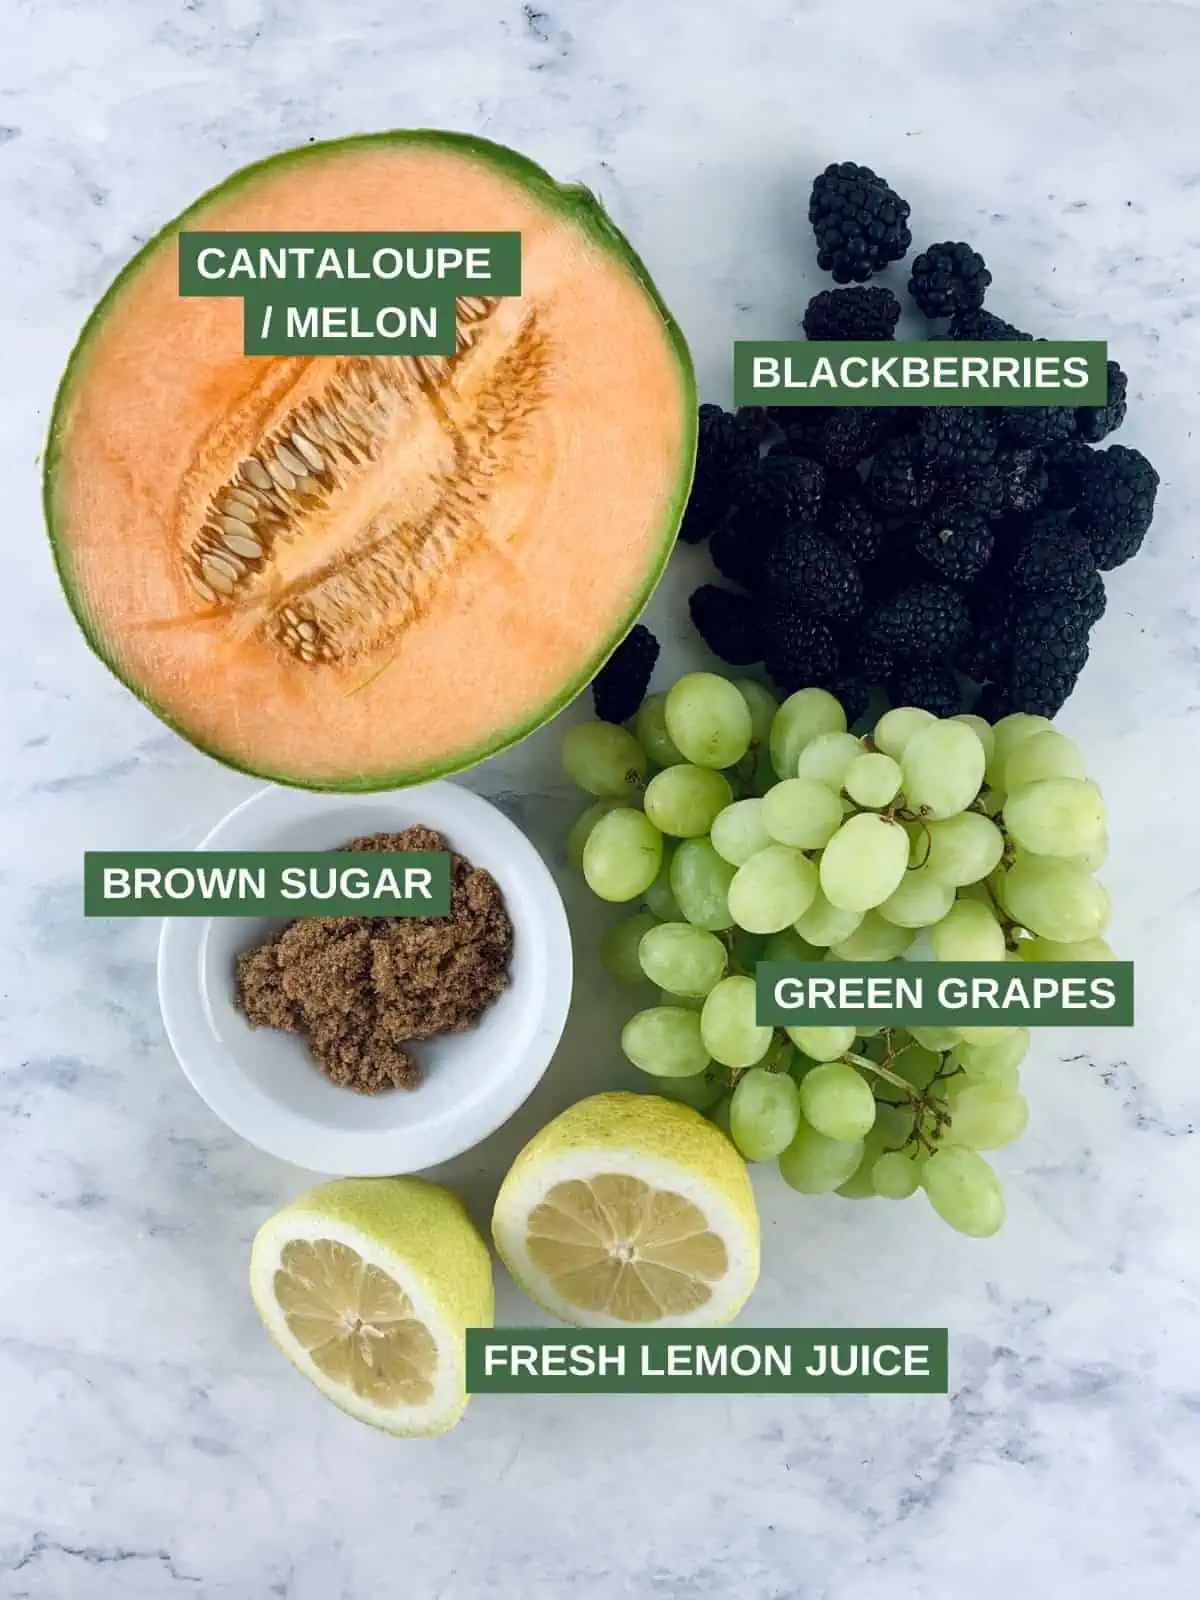 Labelled cantaloupe salad ingredients.